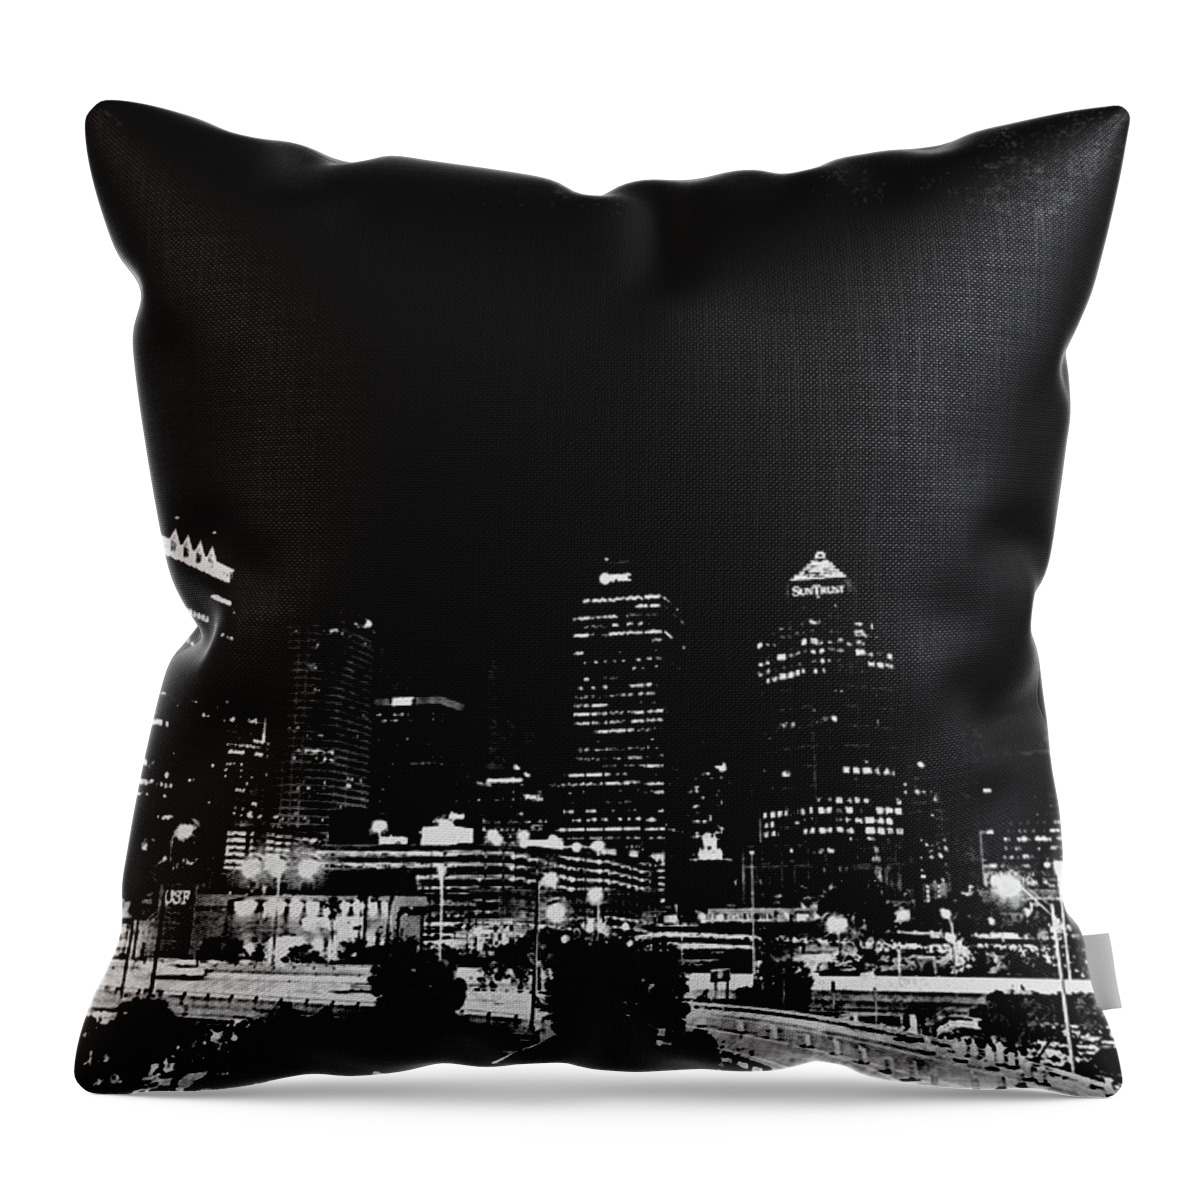 Tampa Throw Pillow featuring the photograph After dark by Stoney Lawrentz